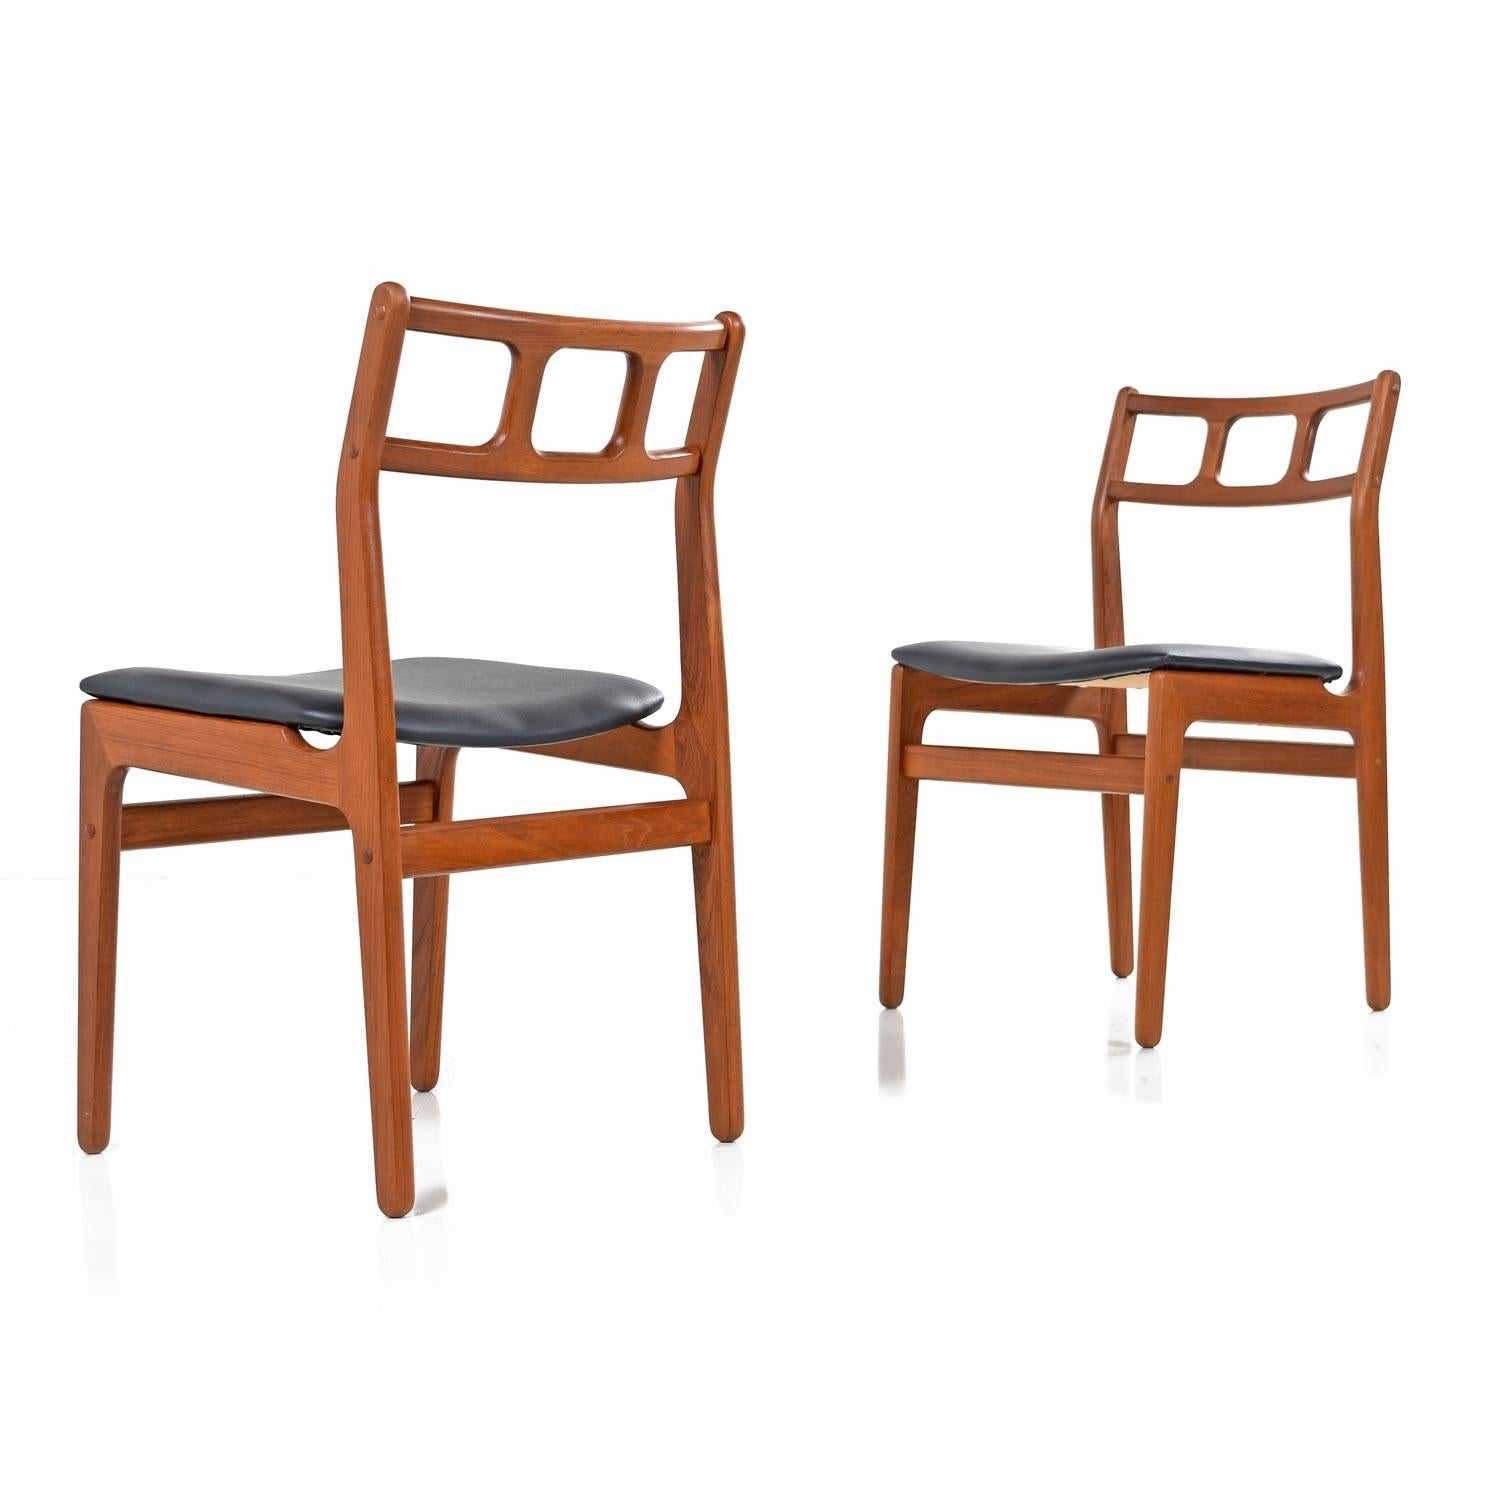 Late 20th Century Vintage Scandinavian Modern Solid Teak Dining Chairs Set of Four